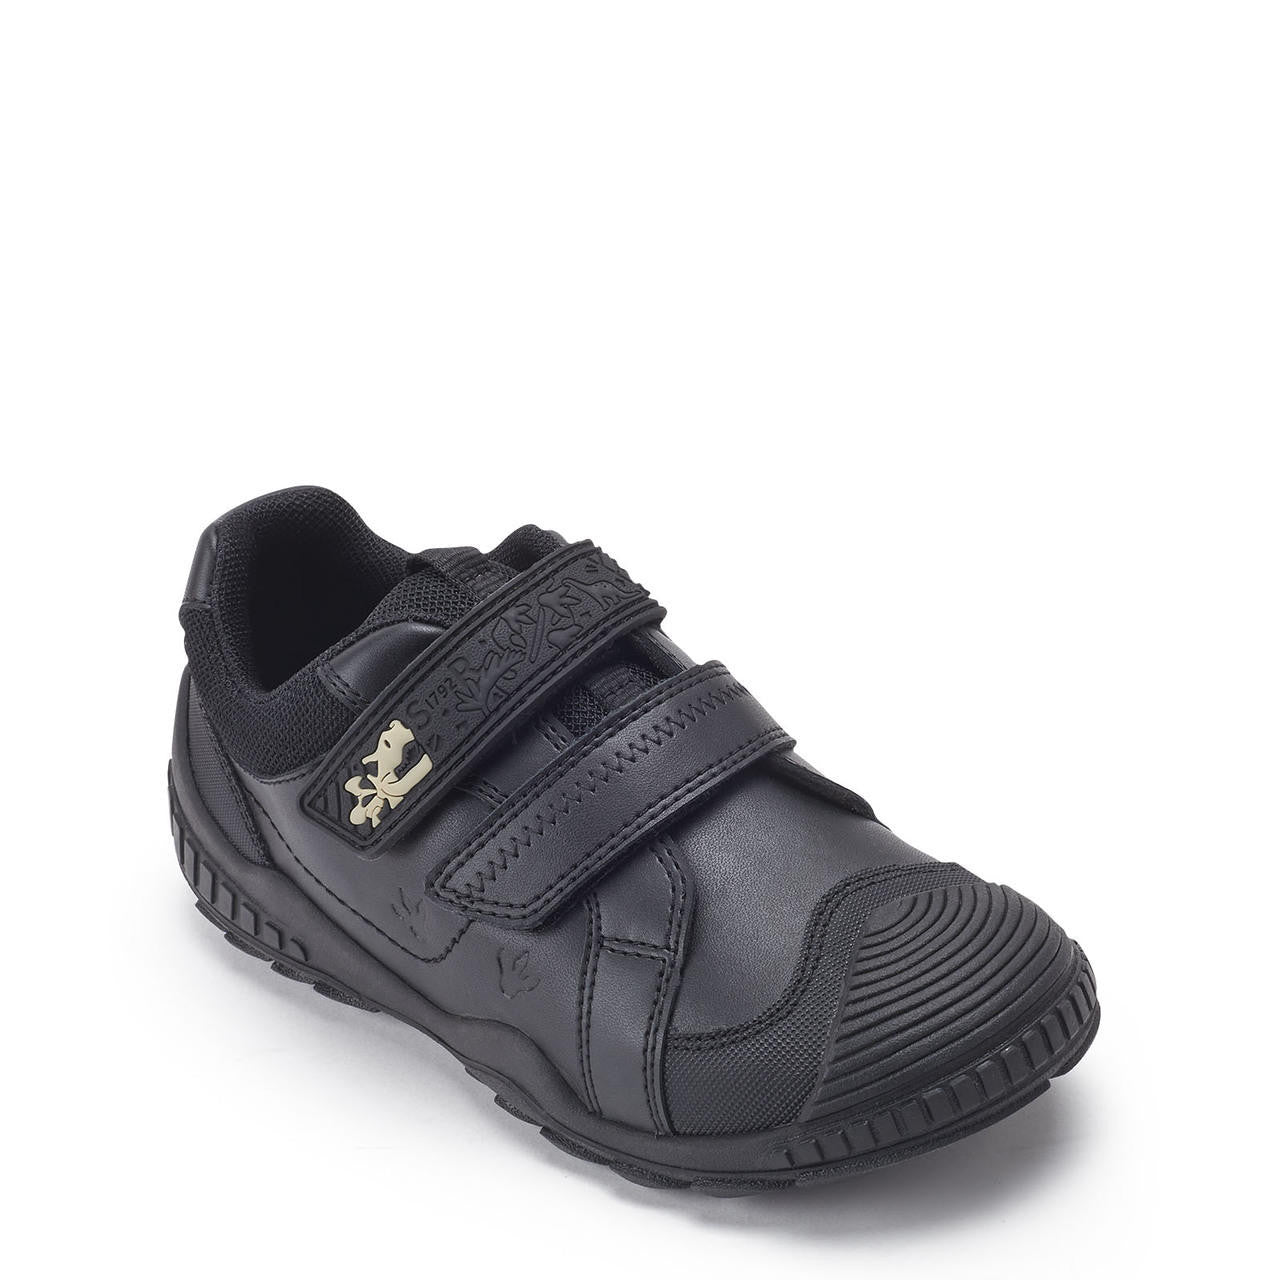 A boys school shoe by Start-Rite, style Rumble in black leather with dino detail and toe, heel and side bumpers. Angled view.